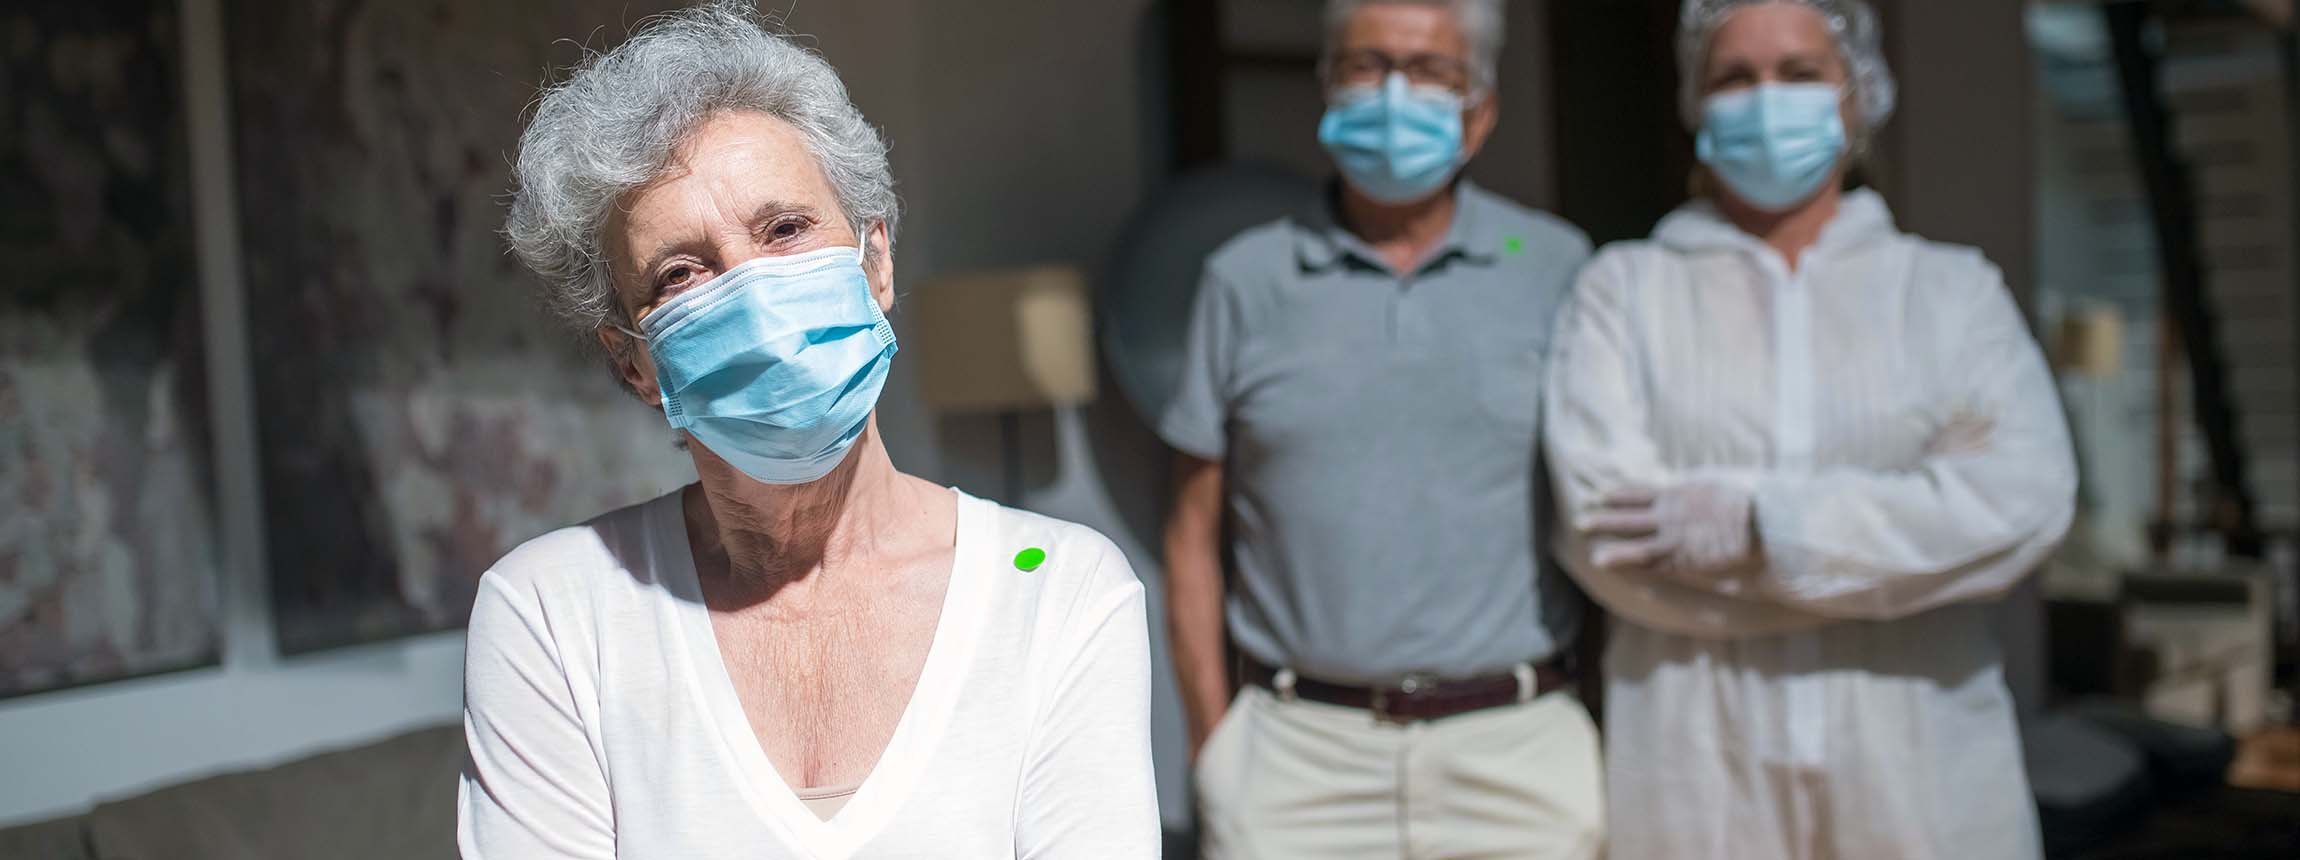 Mature people stand wearing facemasks